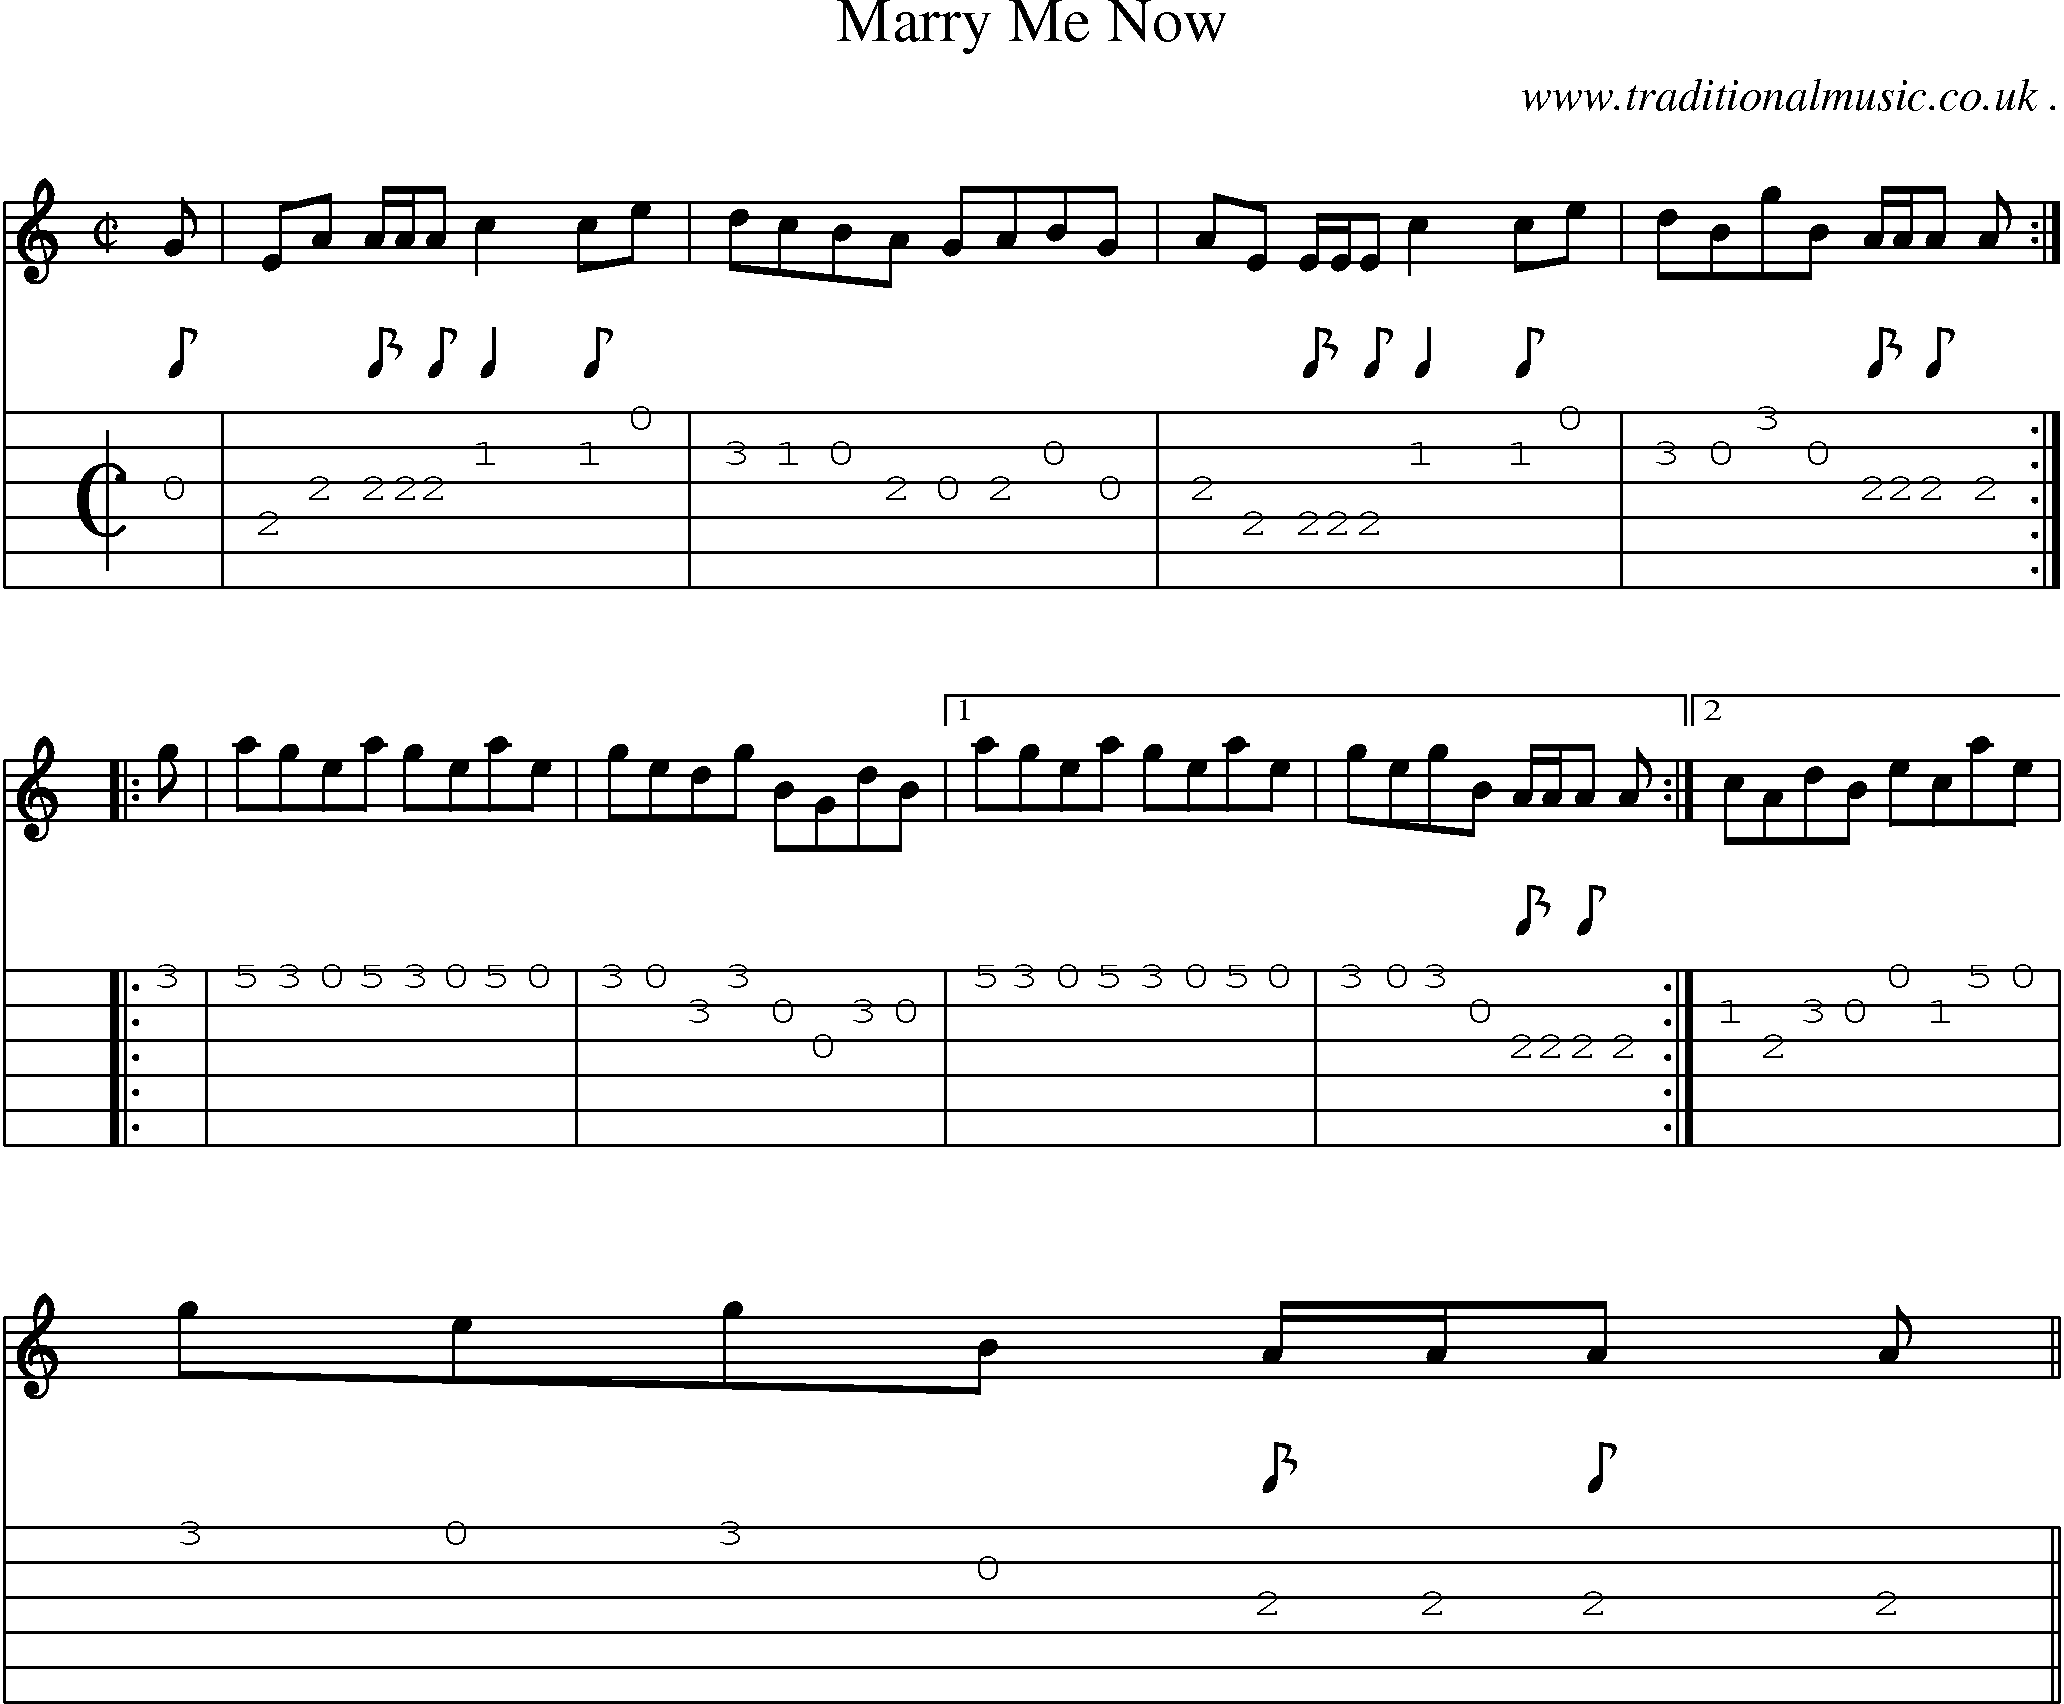 Sheet-music  score, Chords and Guitar Tabs for Marry Me Now